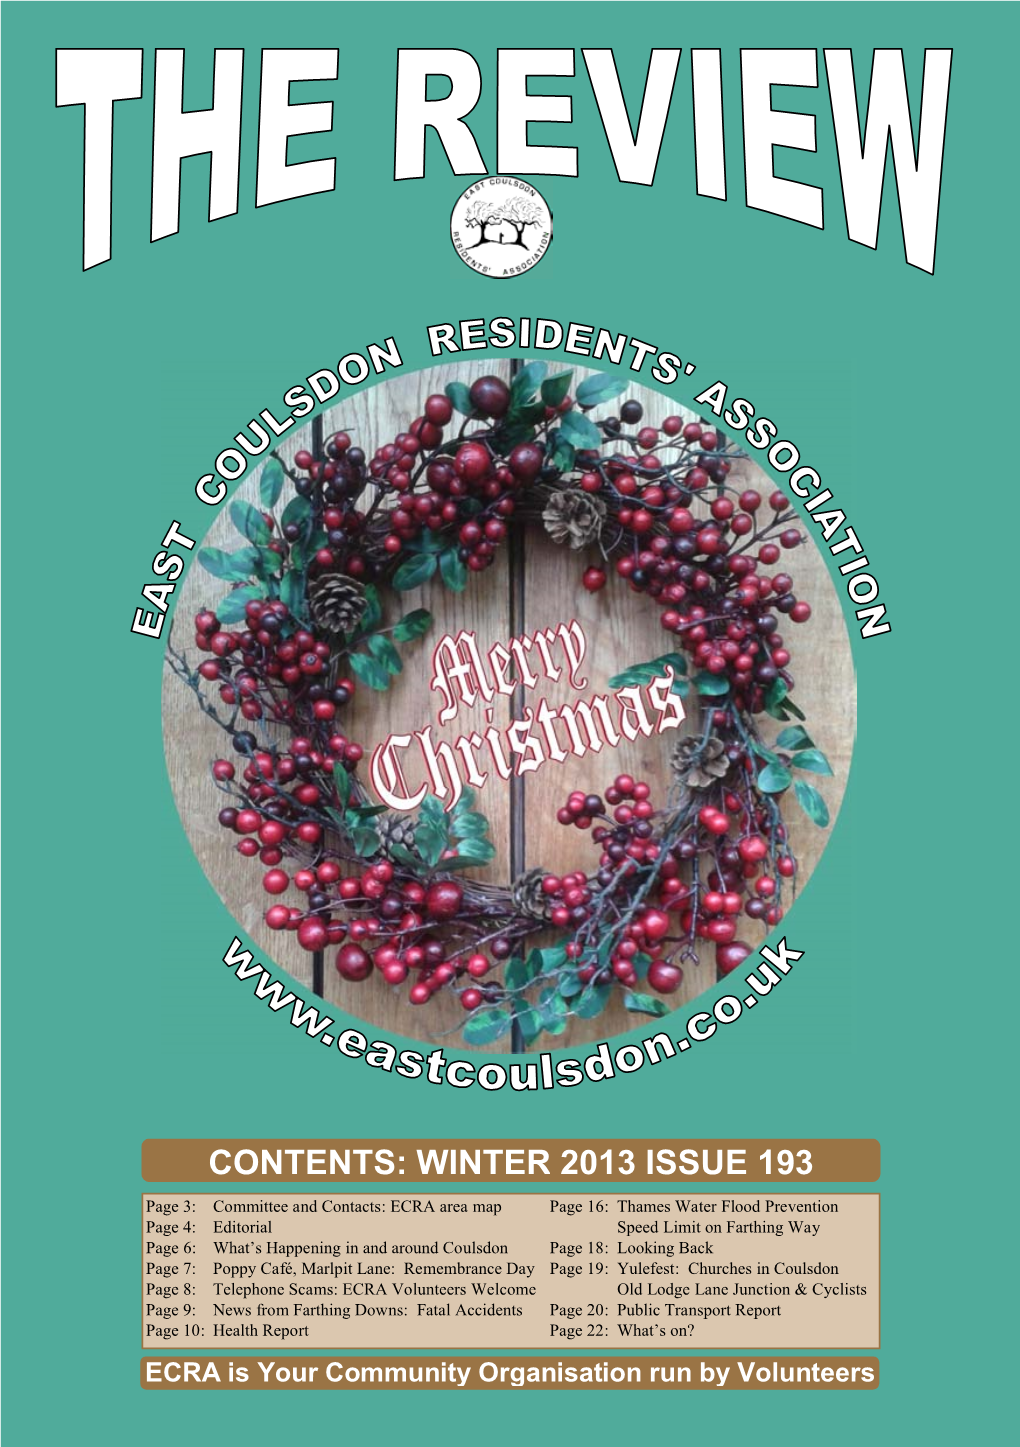 Contents: Winter 2013 Issue 193